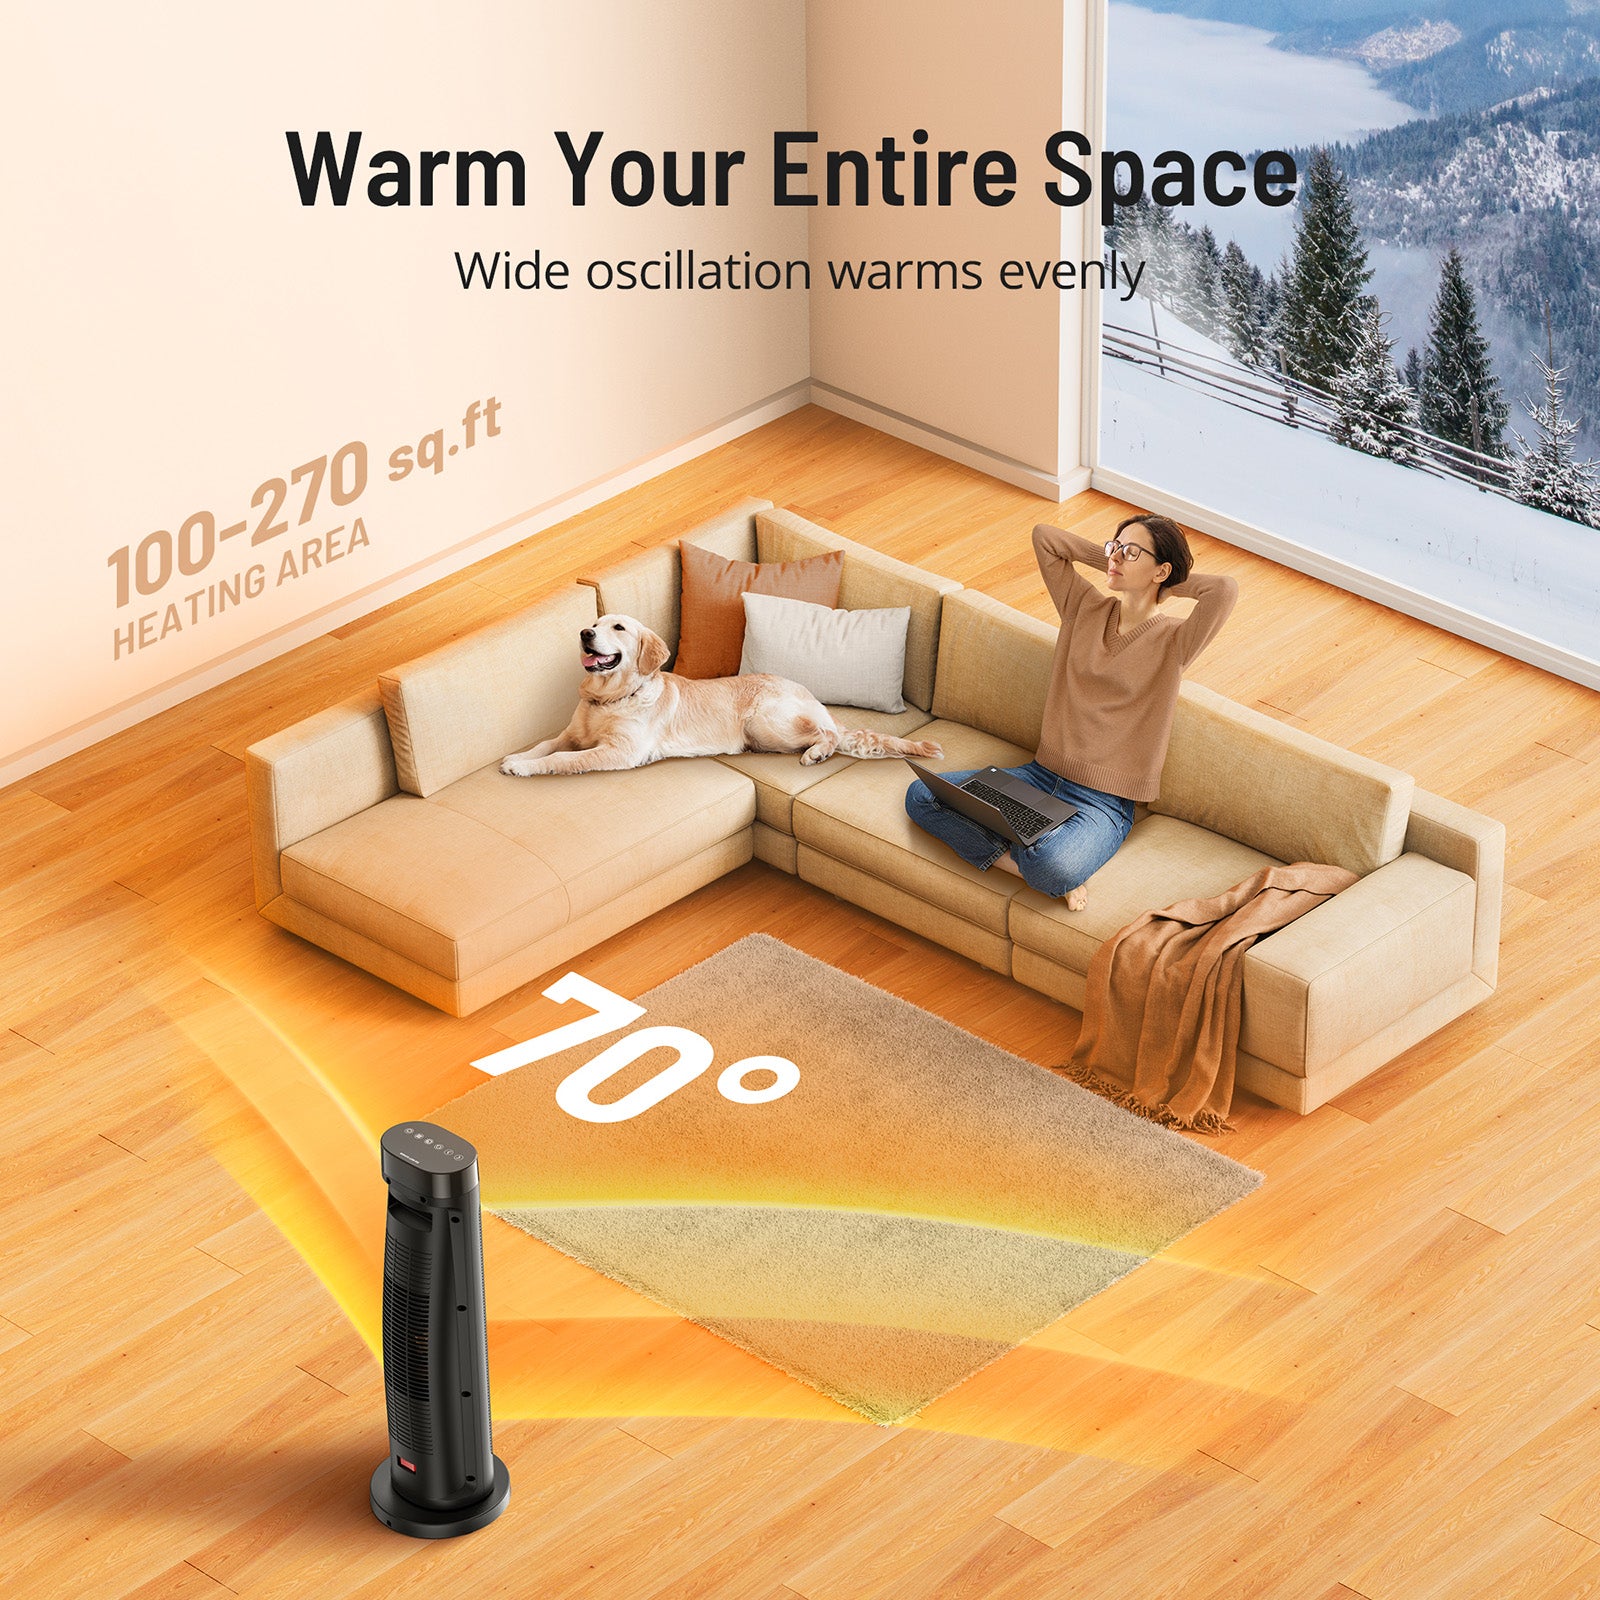 22” Tower Space Heater, 1500W Fast Ceramic Heating with 3 Adjustable Heat Levels